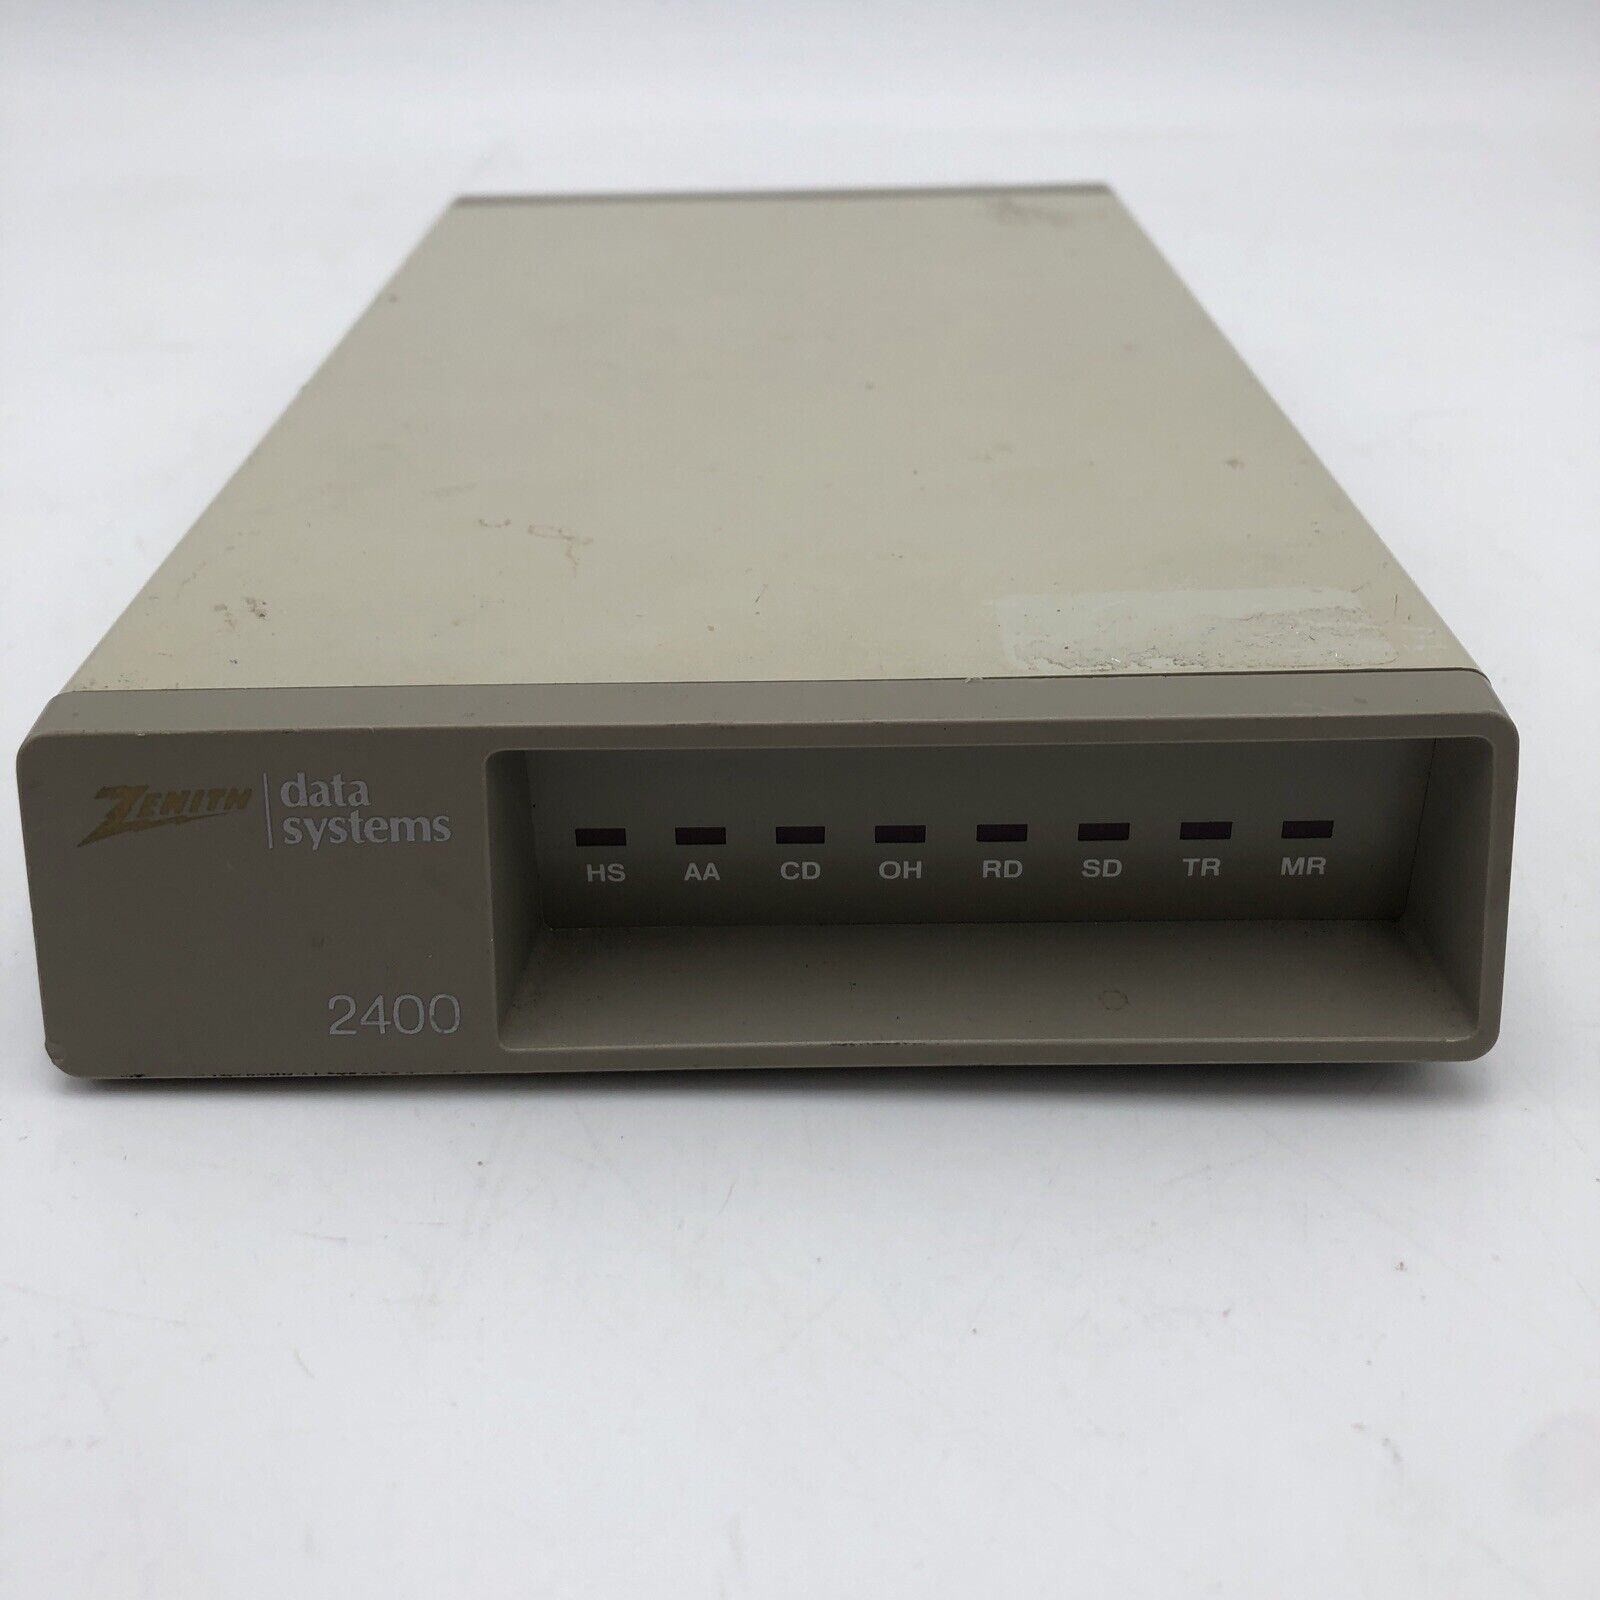 ZENITH DATA SYSTEMS MODEL ZM-2401 2400 BAUD MODEM NO POWER SUPPLY UNTESTED READ